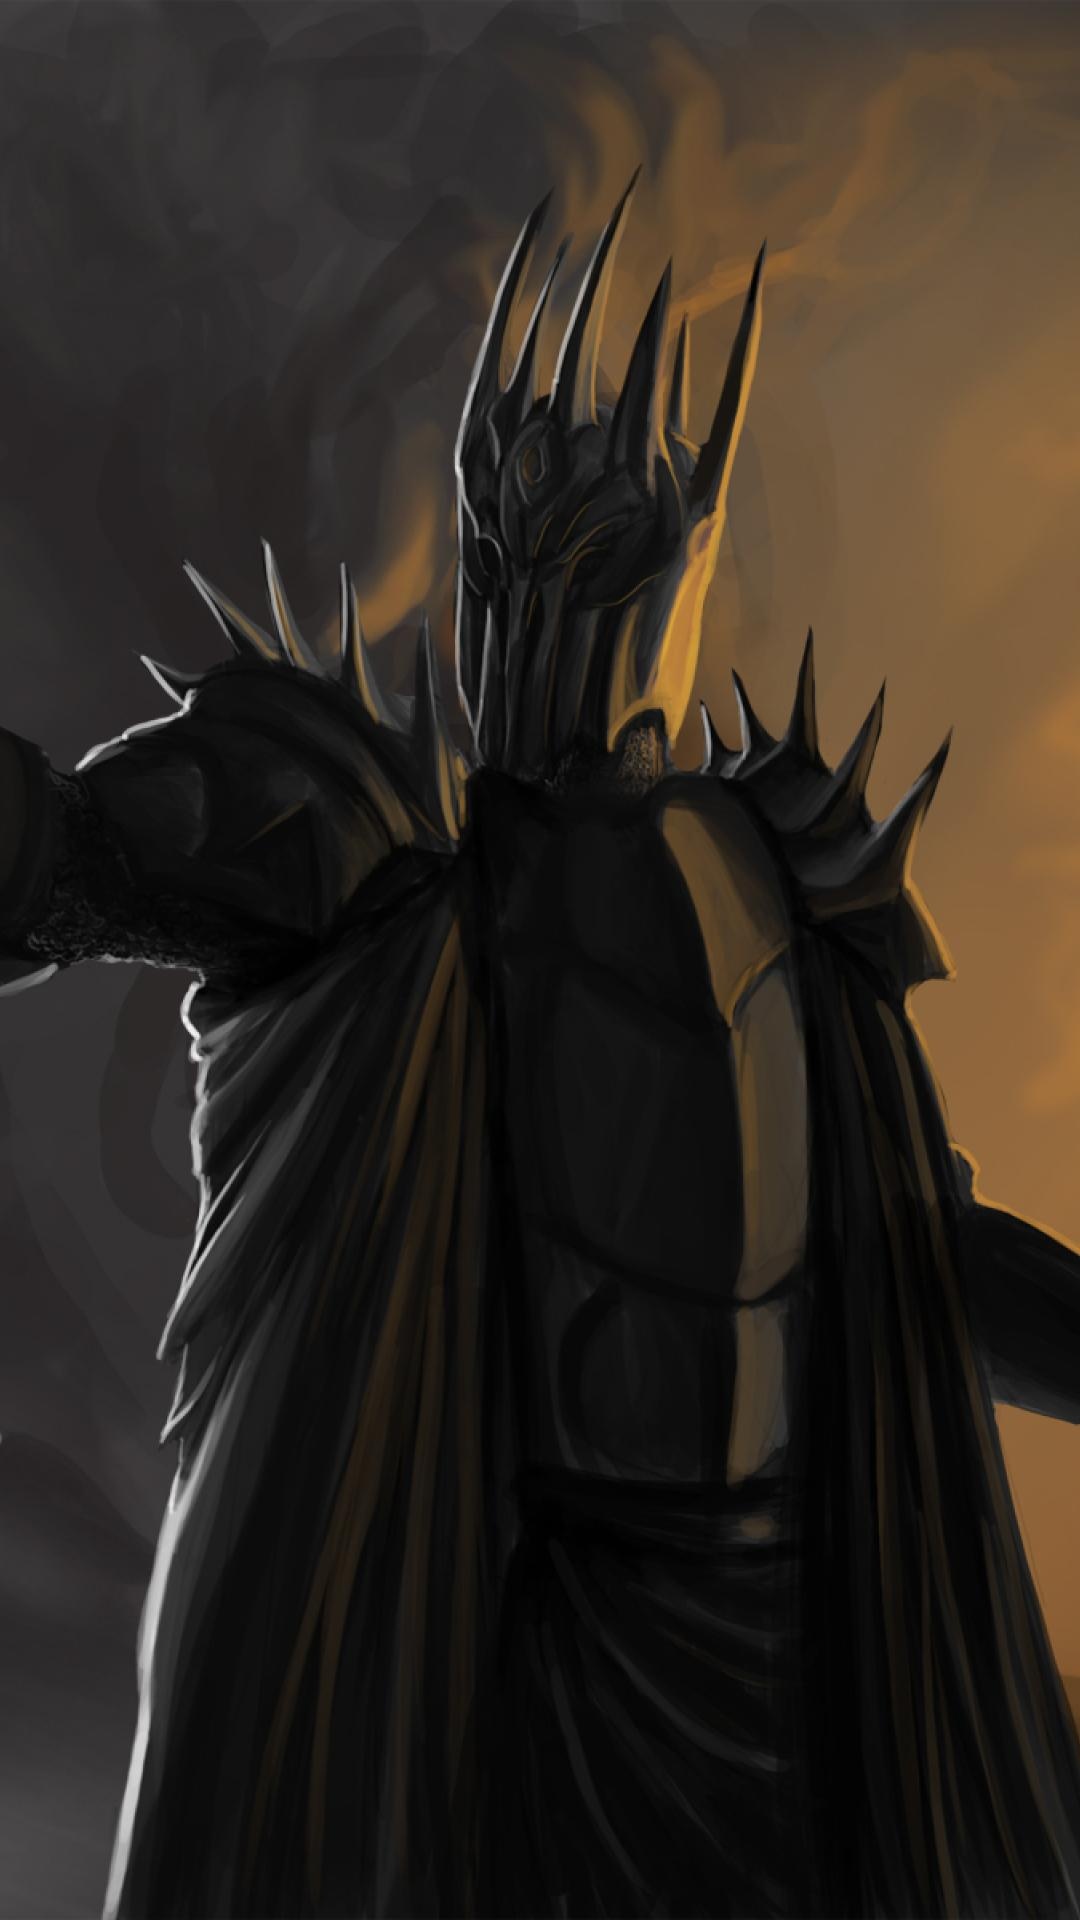 Sauron, Phone wallpapers, Phone backgrounds, 1080x1920 Full HD Handy